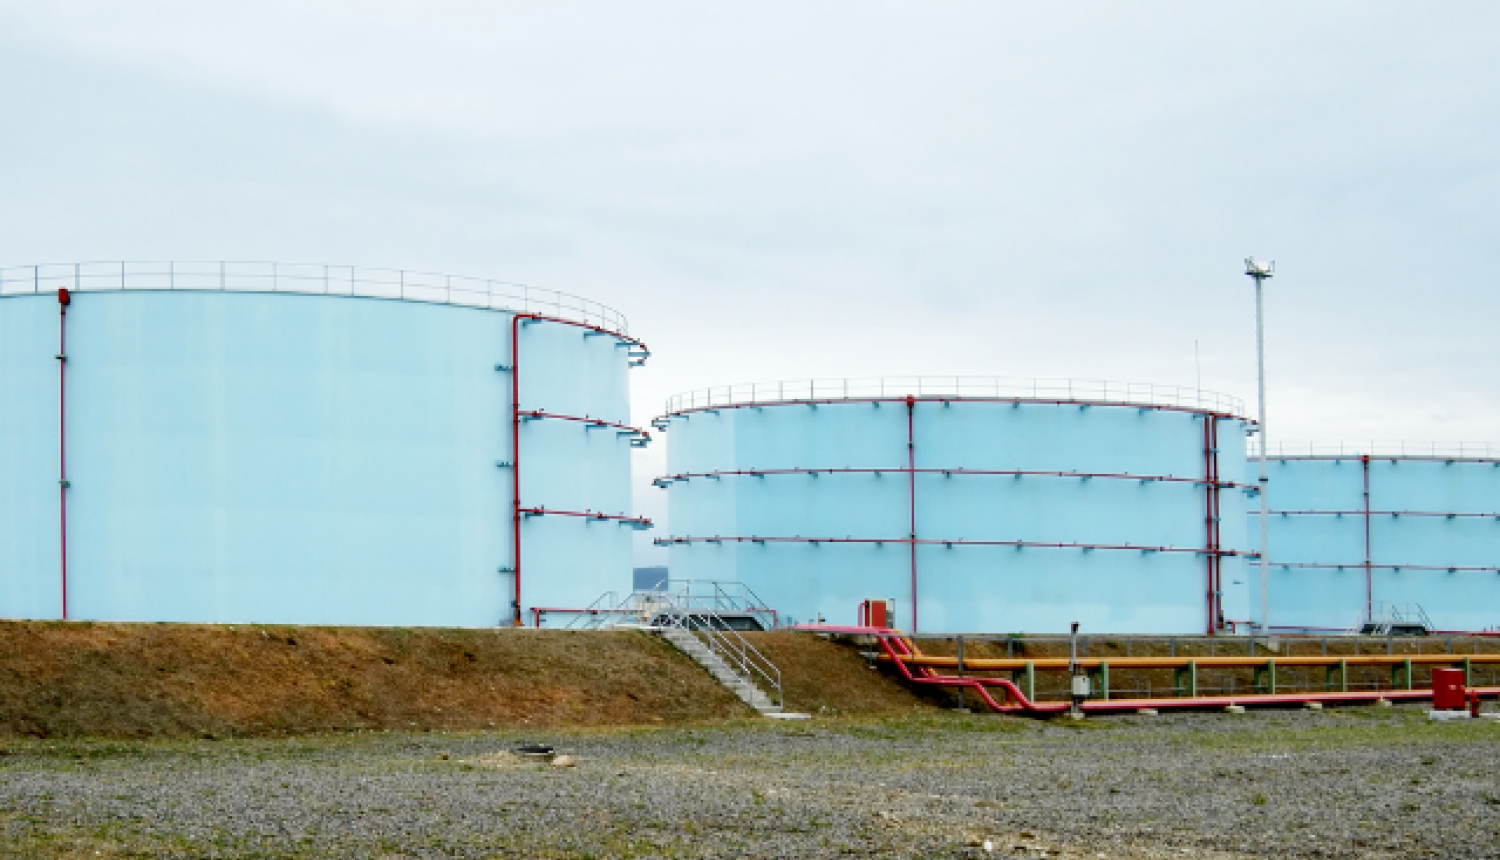 Oil product tanks